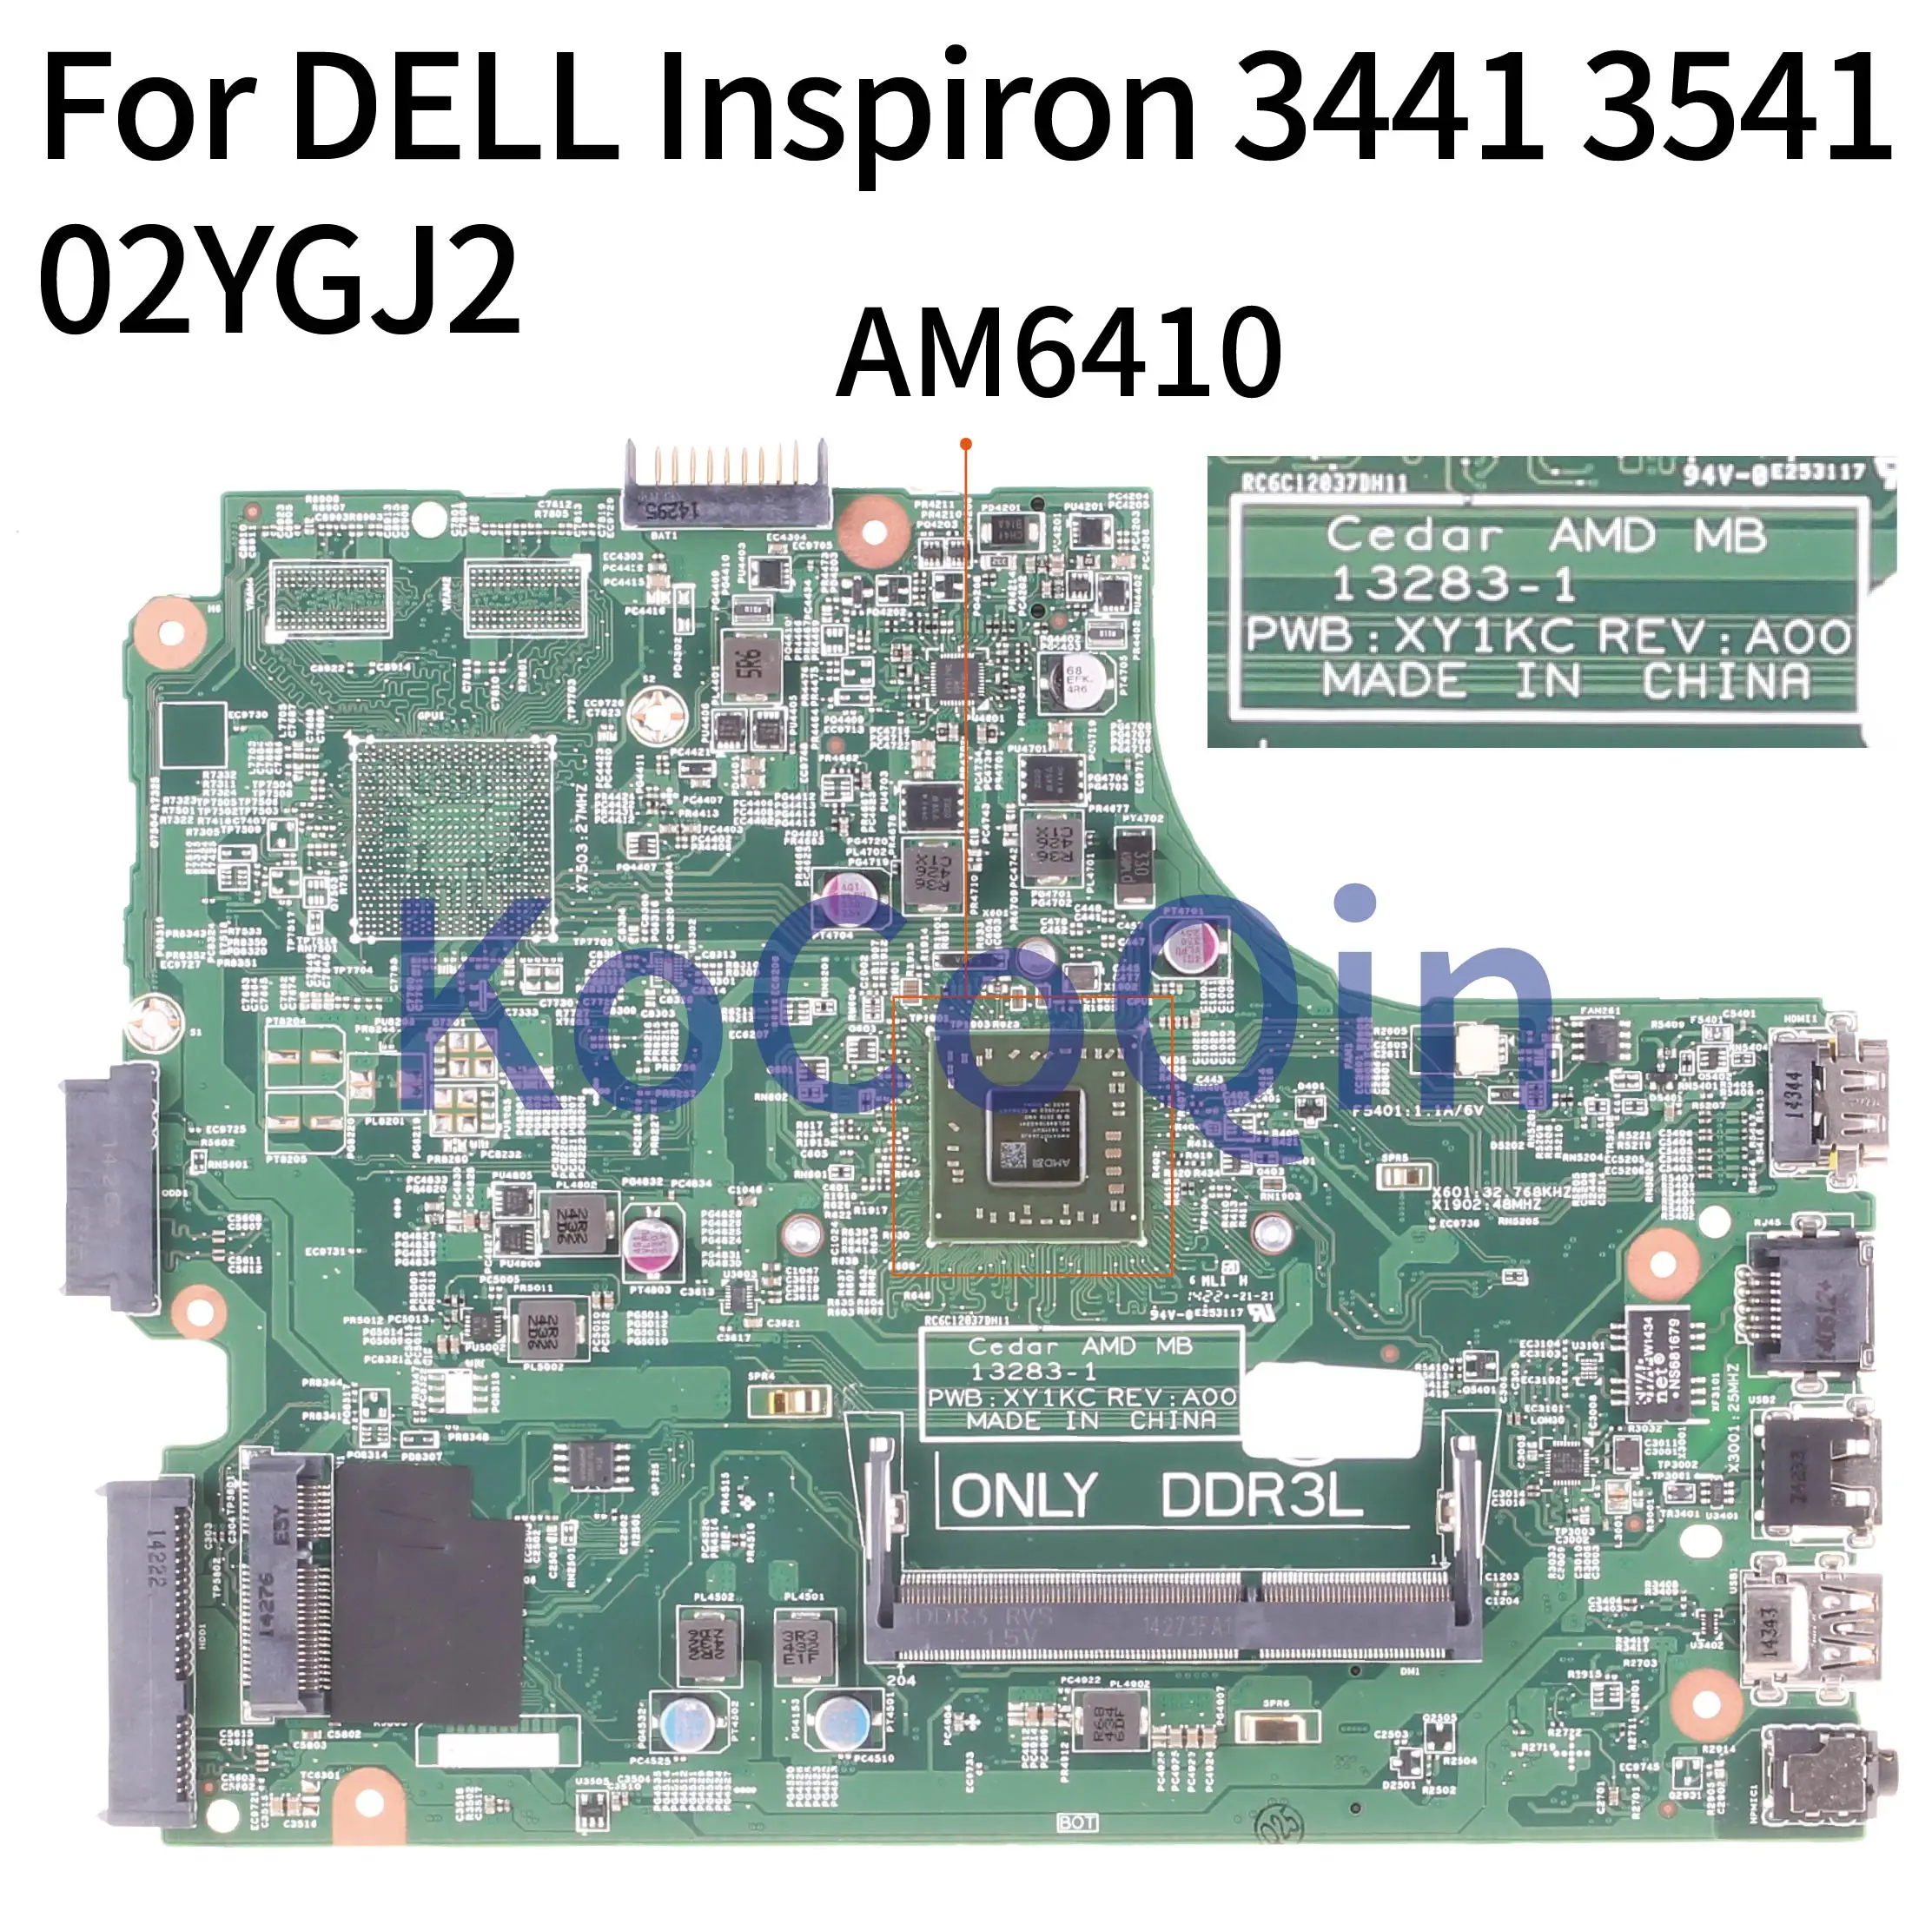 Flash Sale  KoCoQin Laptop motherboard For DELL Inspiron 3441 3541 AM6410 Mainboard 13283-1 CN-02YGJ2 02YGJ2